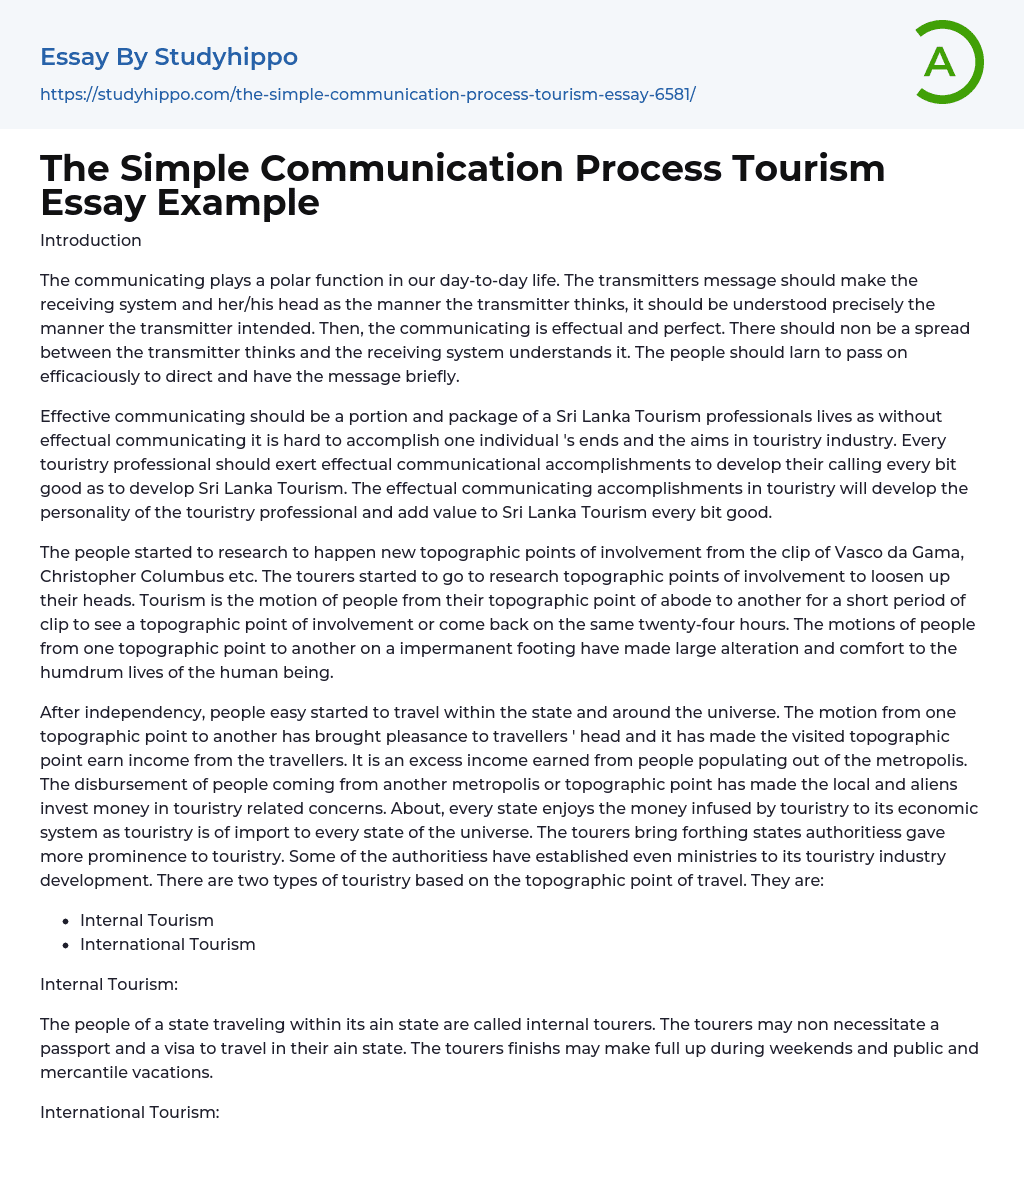 The Simple Communication Process Tourism Essay Example